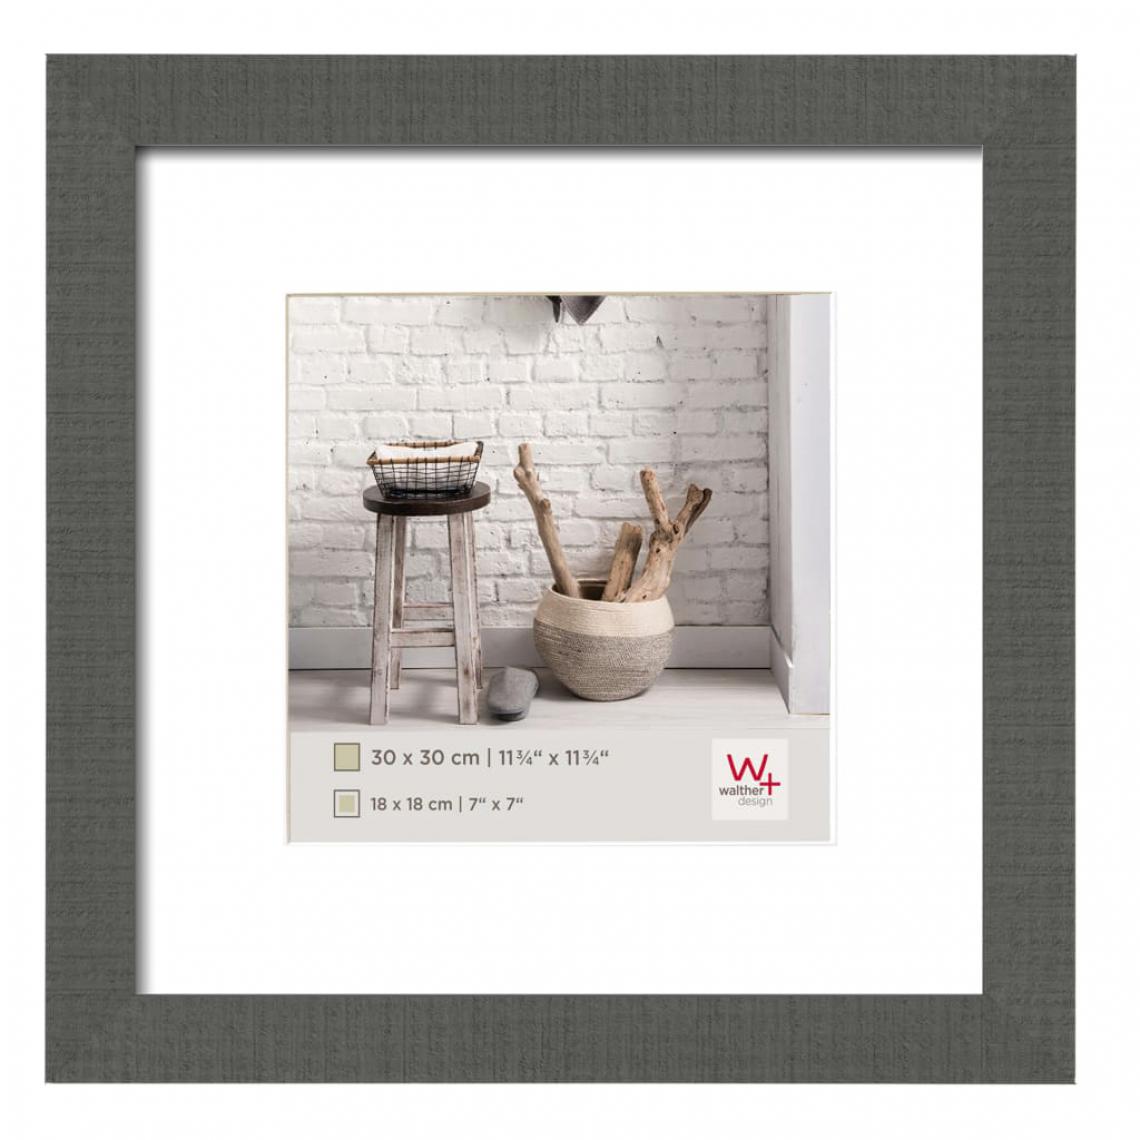 Walther - Walther Design Cadre photo Home 30x30 cm Gris - Cadres, pêle-mêle